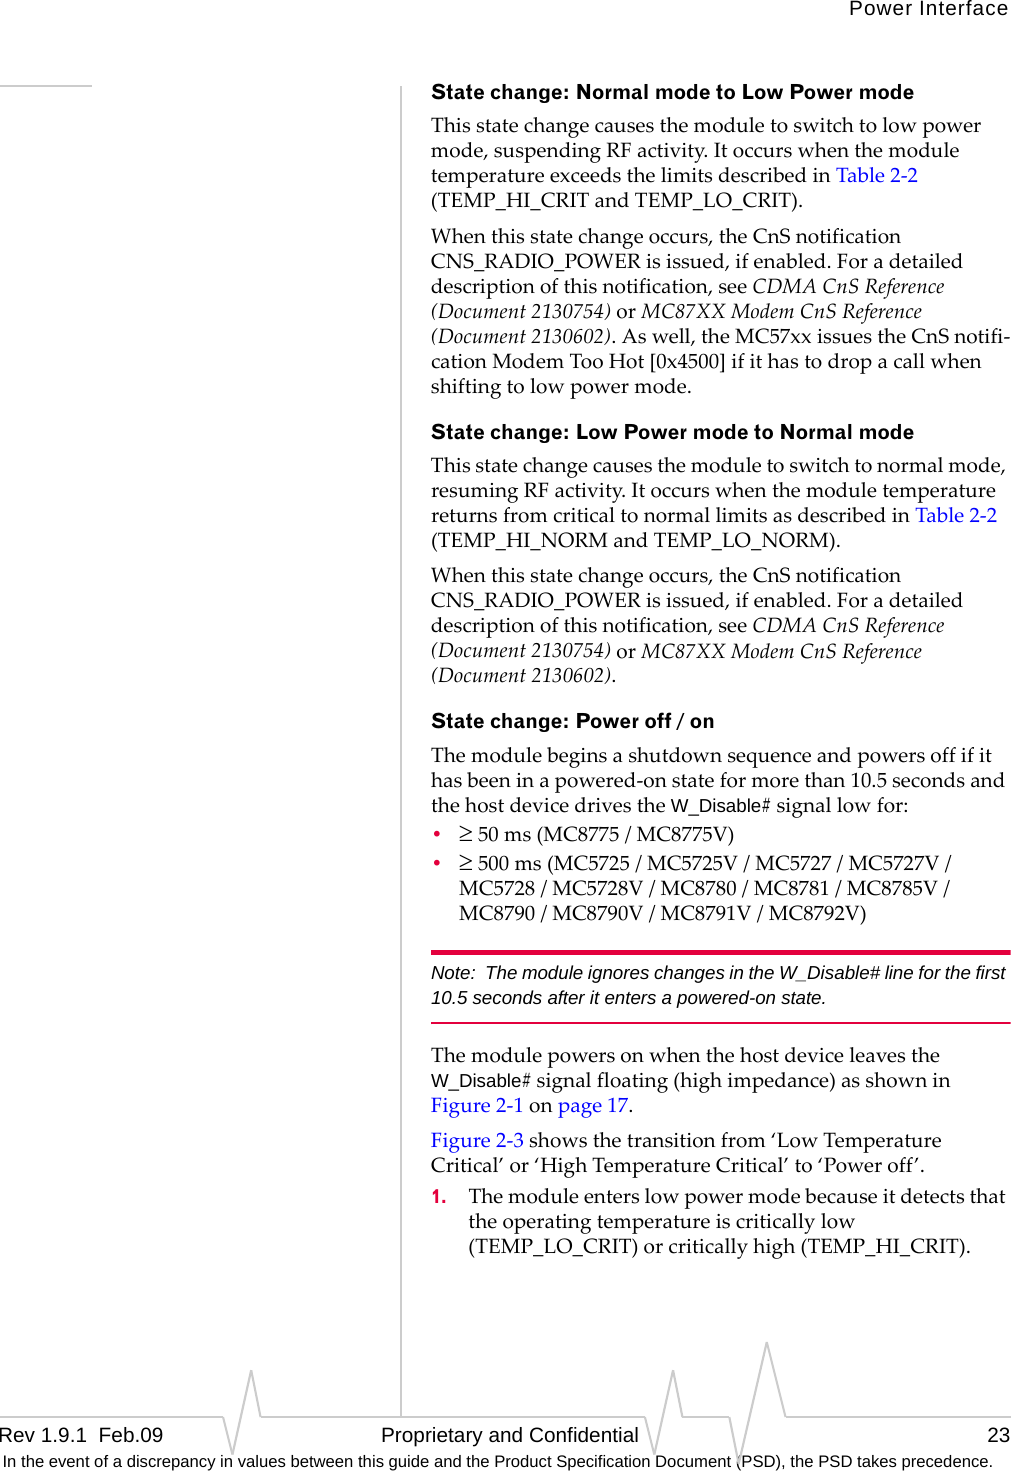 Power InterfaceRev 1.9.1  Feb.09   Proprietary and Confidential 23 In the event of a discrepancy in values between this guide and the Product Specification Document (PSD), the PSD takes precedence.State change: Normal mode to Low Power modeThisstatechangecausesthemoduletoswitchtolowpowermode,suspendingRFactivity.ItoccurswhenthemoduletemperatureexceedsthelimitsdescribedinTable2‐2(TEMP_HI_CRITandTEMP_LO_CRIT).Whenthisstatechangeoccurs,theCnSnotificationCNS_RADIO_POWERisissued,ifenabled.Foradetaileddescriptionofthisnotification,seeCDMACnSReference(Document2130754)orMC87XXModemCnSReference(Document2130602).Aswell,theMC57xxissuestheCnSnotifi‐cationModemTooHot[0x4500]ifithastodropacallwhenshiftingtolowpowermode.State change: Low Power mode to Normal modeThisstatechangecausesthemoduletoswitchtonormalmode,resumingRFactivity.ItoccurswhenthemoduletemperaturereturnsfromcriticaltonormallimitsasdescribedinTable2‐2(TEMP_HI_NORMandTEMP_LO_NORM).Whenthisstatechangeoccurs,theCnSnotificationCNS_RADIO_POWERisissued,ifenabled.Foradetaileddescriptionofthisnotification,seeCDMACnSReference(Document2130754)orMC87XXModemCnSReference(Document2130602).State change: Power off / onThemodulebeginsashutdownsequenceandpowersoffifithasbeeninapowered‐onstateformorethan10.5secondsandthehostdevicedrivestheW_Disable#signallowfor:•≥50ms(MC8775/MC8775V)•≥500ms(MC5725/MC5725V/MC5727/MC5727V/MC5728/MC5728V/MC8780/MC8781/MC8785V/MC8790/MC8790V/MC8791V/MC8792V)Note: The module ignores changes in the W_Disable# line for the first 10.5 seconds after it enters a powered-on state.ThemodulepowersonwhenthehostdeviceleavestheW_Disable#signalfloating(highimpedance)asshowninFigure2‐1onpage17.Figure2‐3showsthetransitionfrom‘LowTemperatureCritical’or‘HighTemperatureCritical’to‘Poweroff’.1. Themoduleenterslowpowermodebecauseitdetectsthattheoperatingtemperatureiscriticallylow(TEMP_LO_CRIT)orcriticallyhigh(TEMP_HI_CRIT).